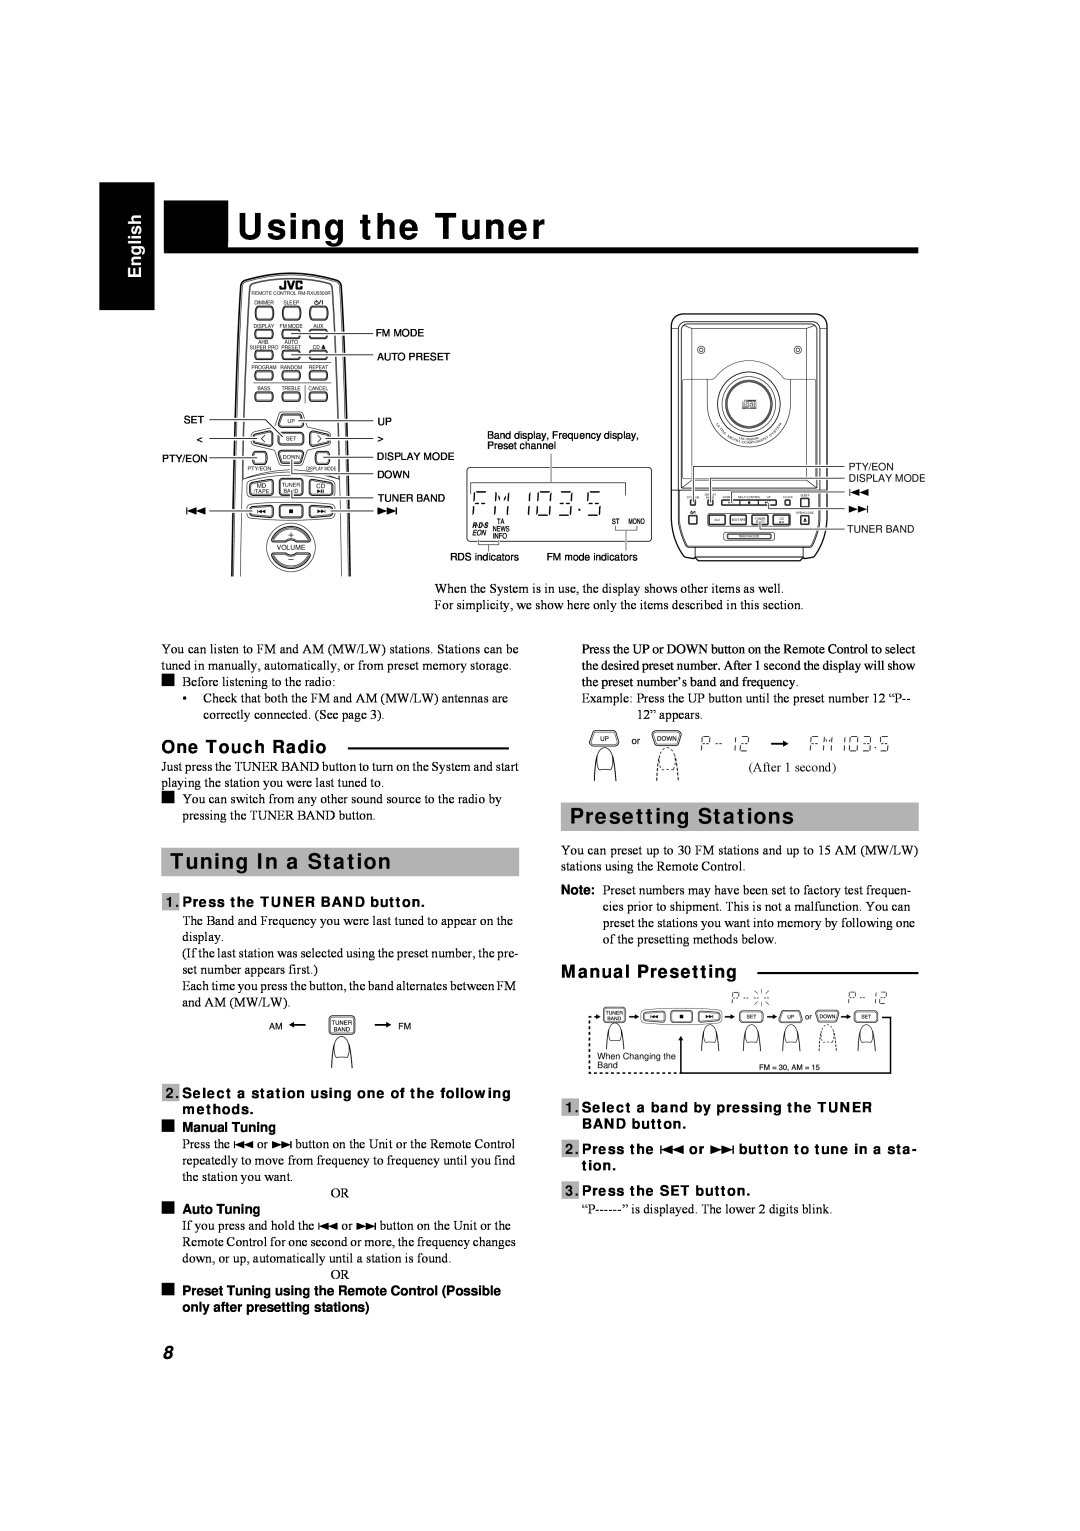 JVC LVT0084-001A Using the Tuner, Tuning In a Station, Presetting Stations, One Touch Radio, Manual Presetting, English 